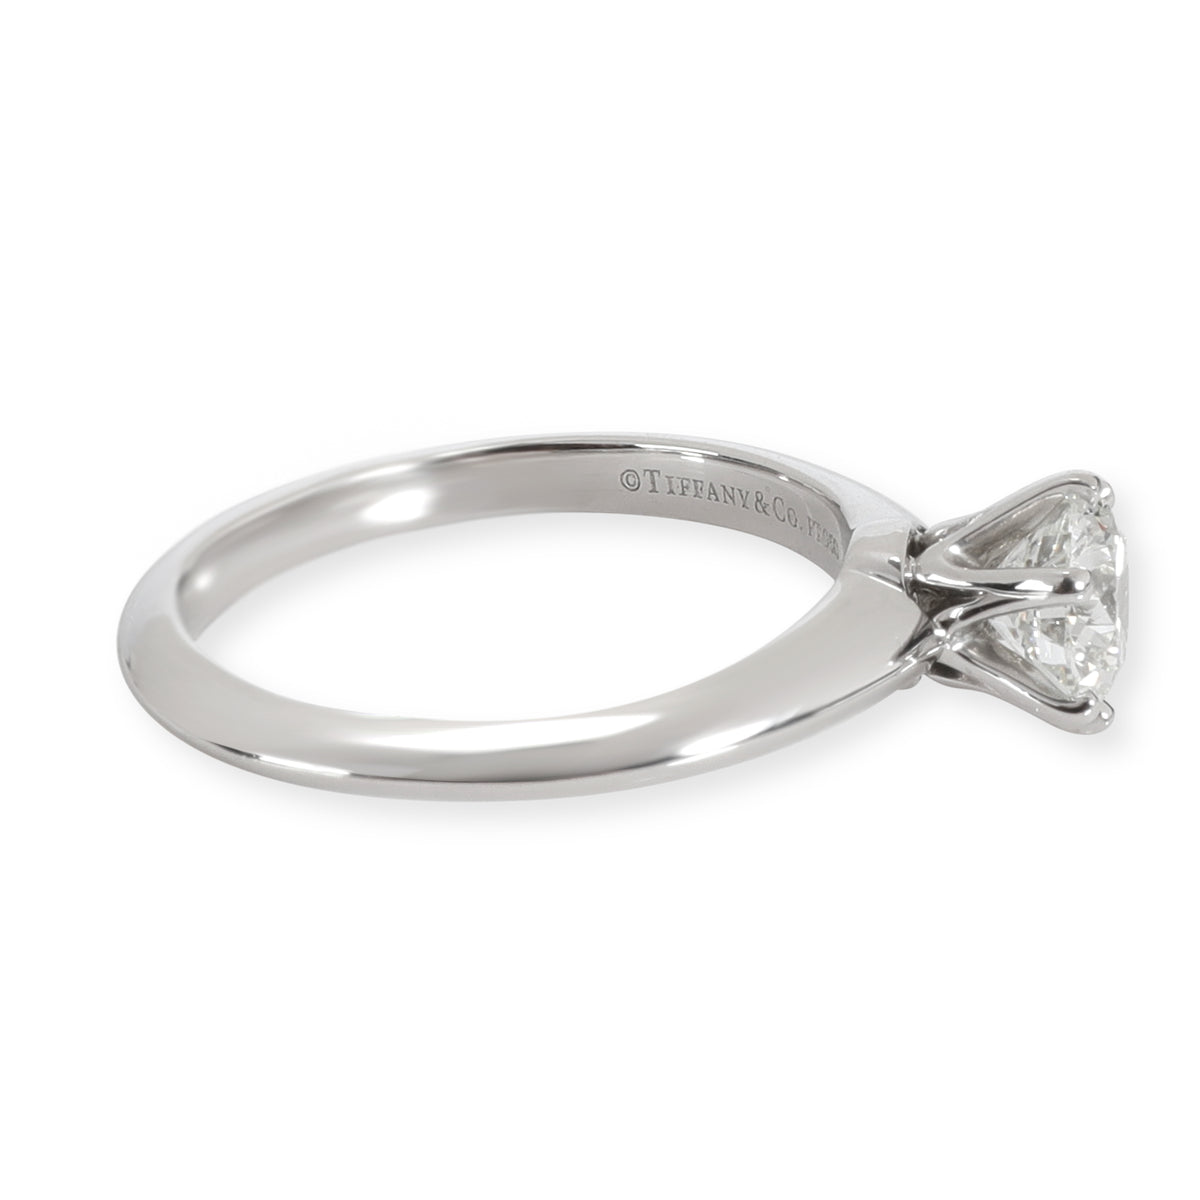 Tiffany & Co. Solitaire Diamond Ring in Platinum G IF 0.92 CTW